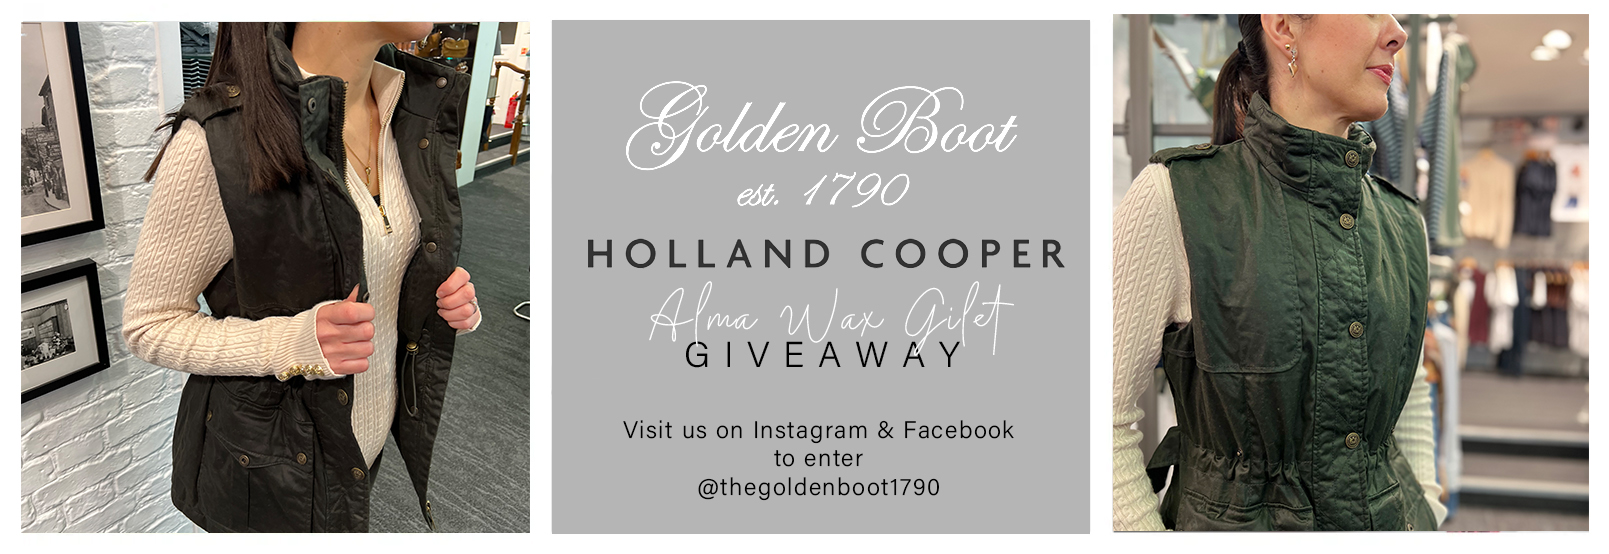 Holland Cooper Giveaway